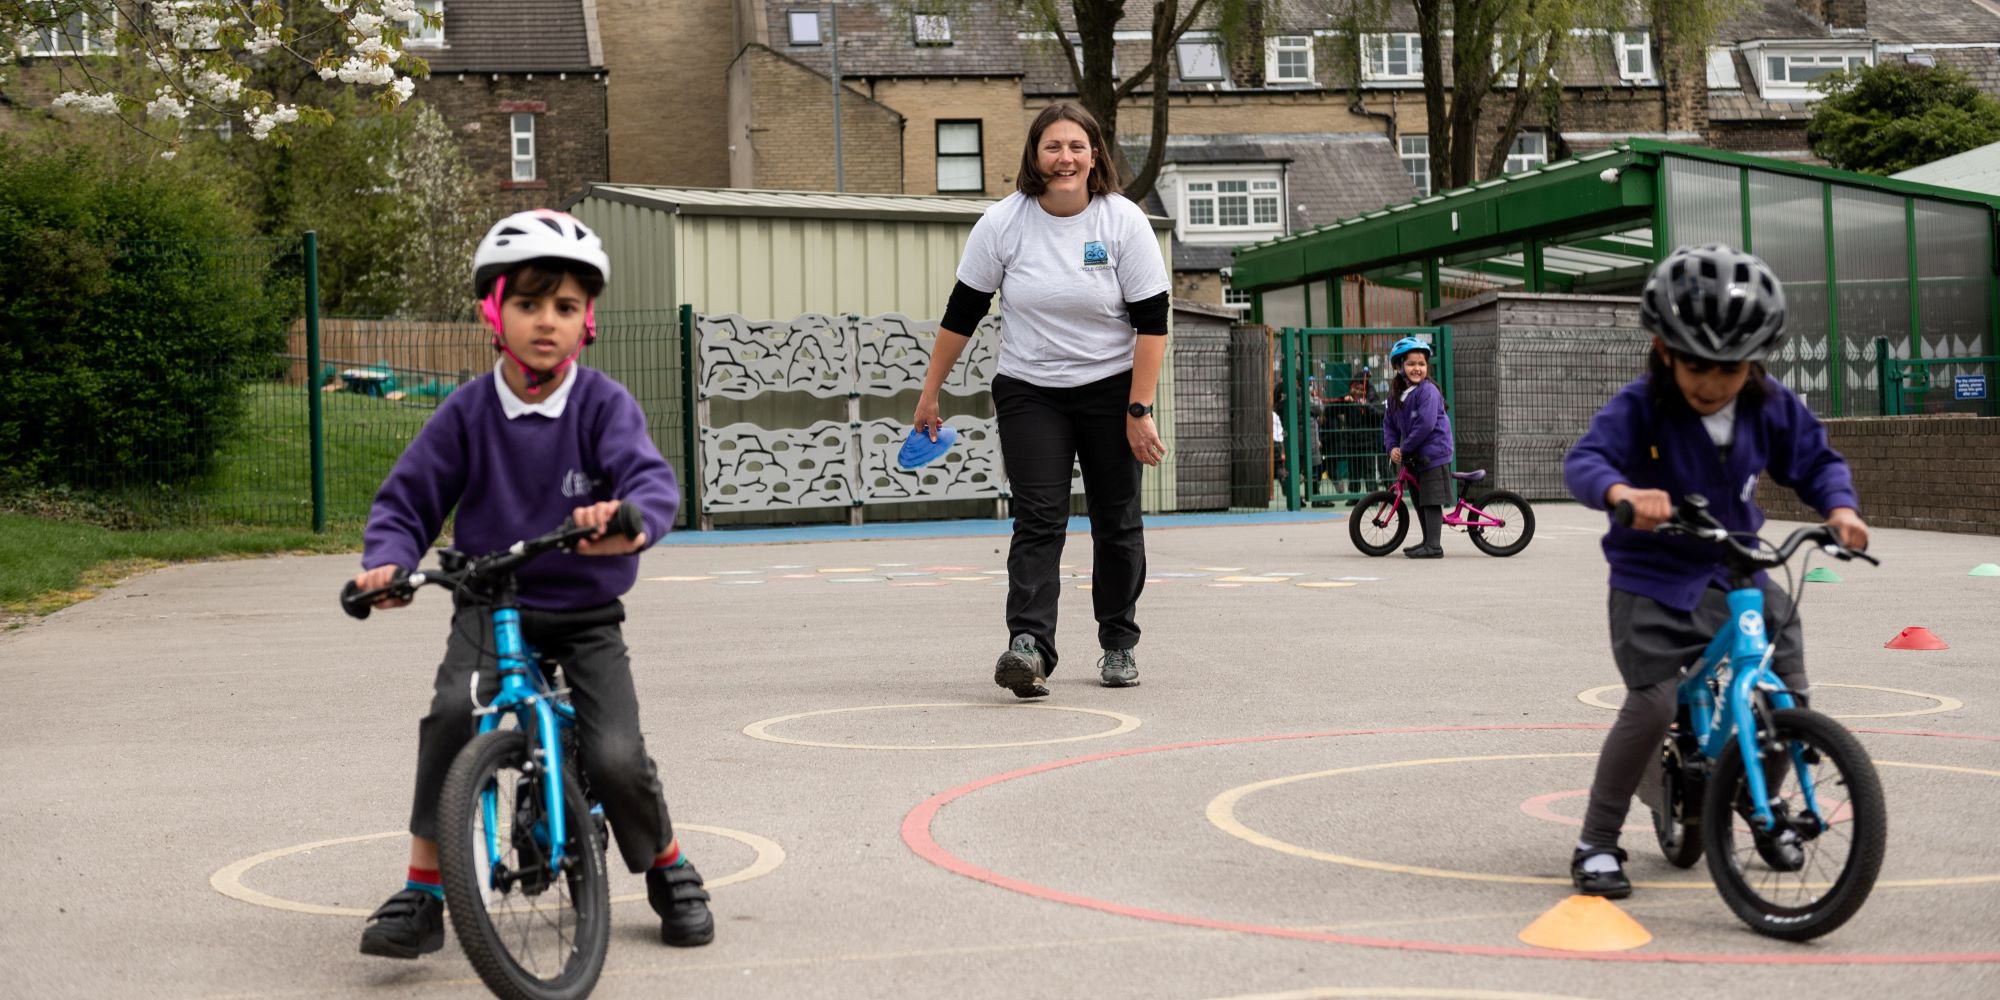 A Bikeability instructor is teaching two young children on balance bikes in a playground